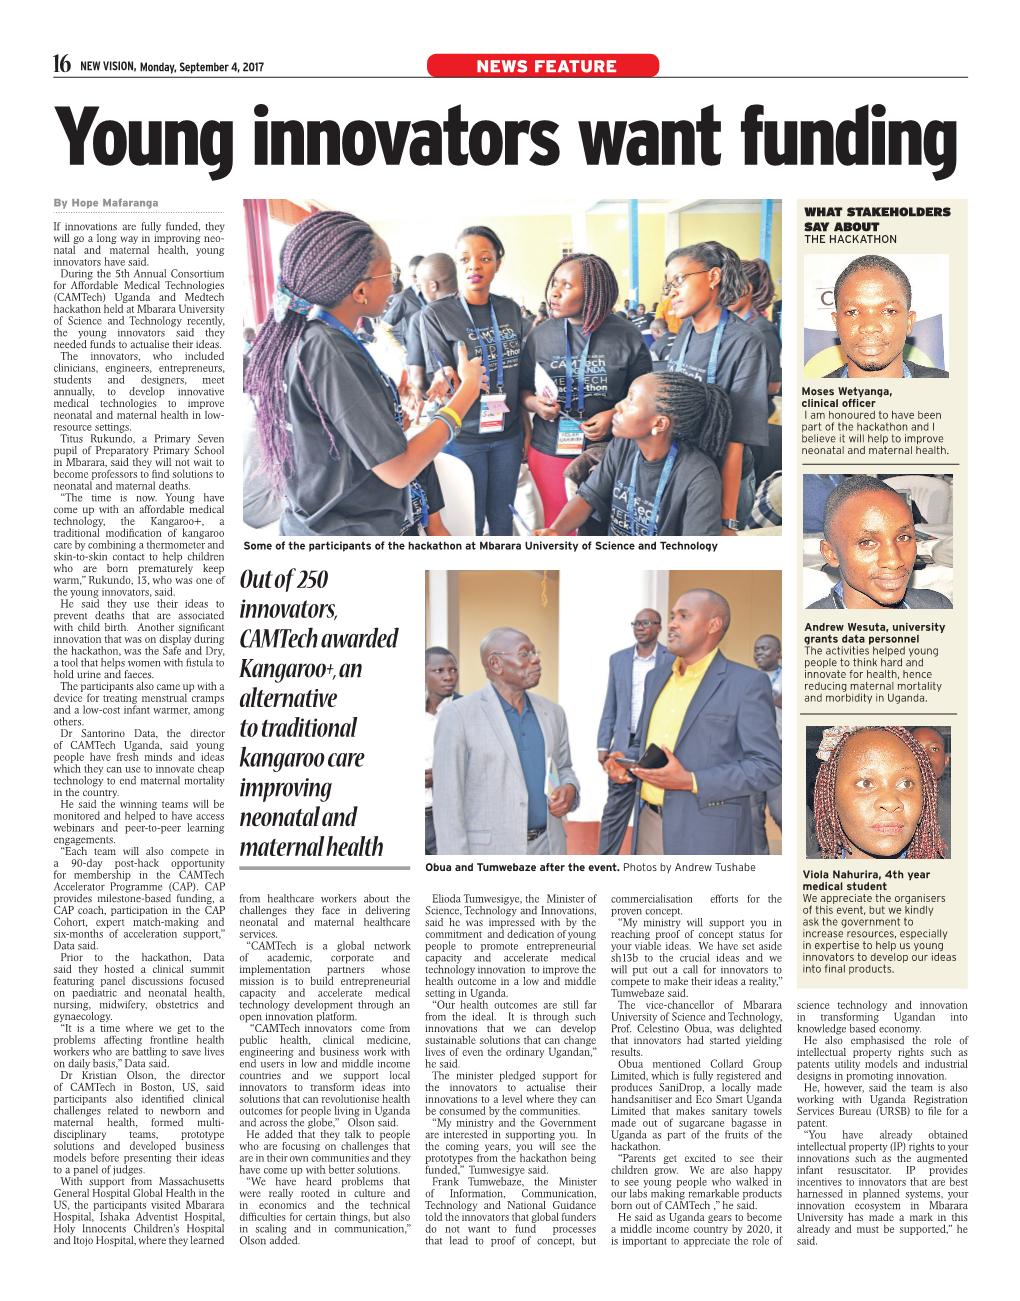 Young Innovators Want Funding